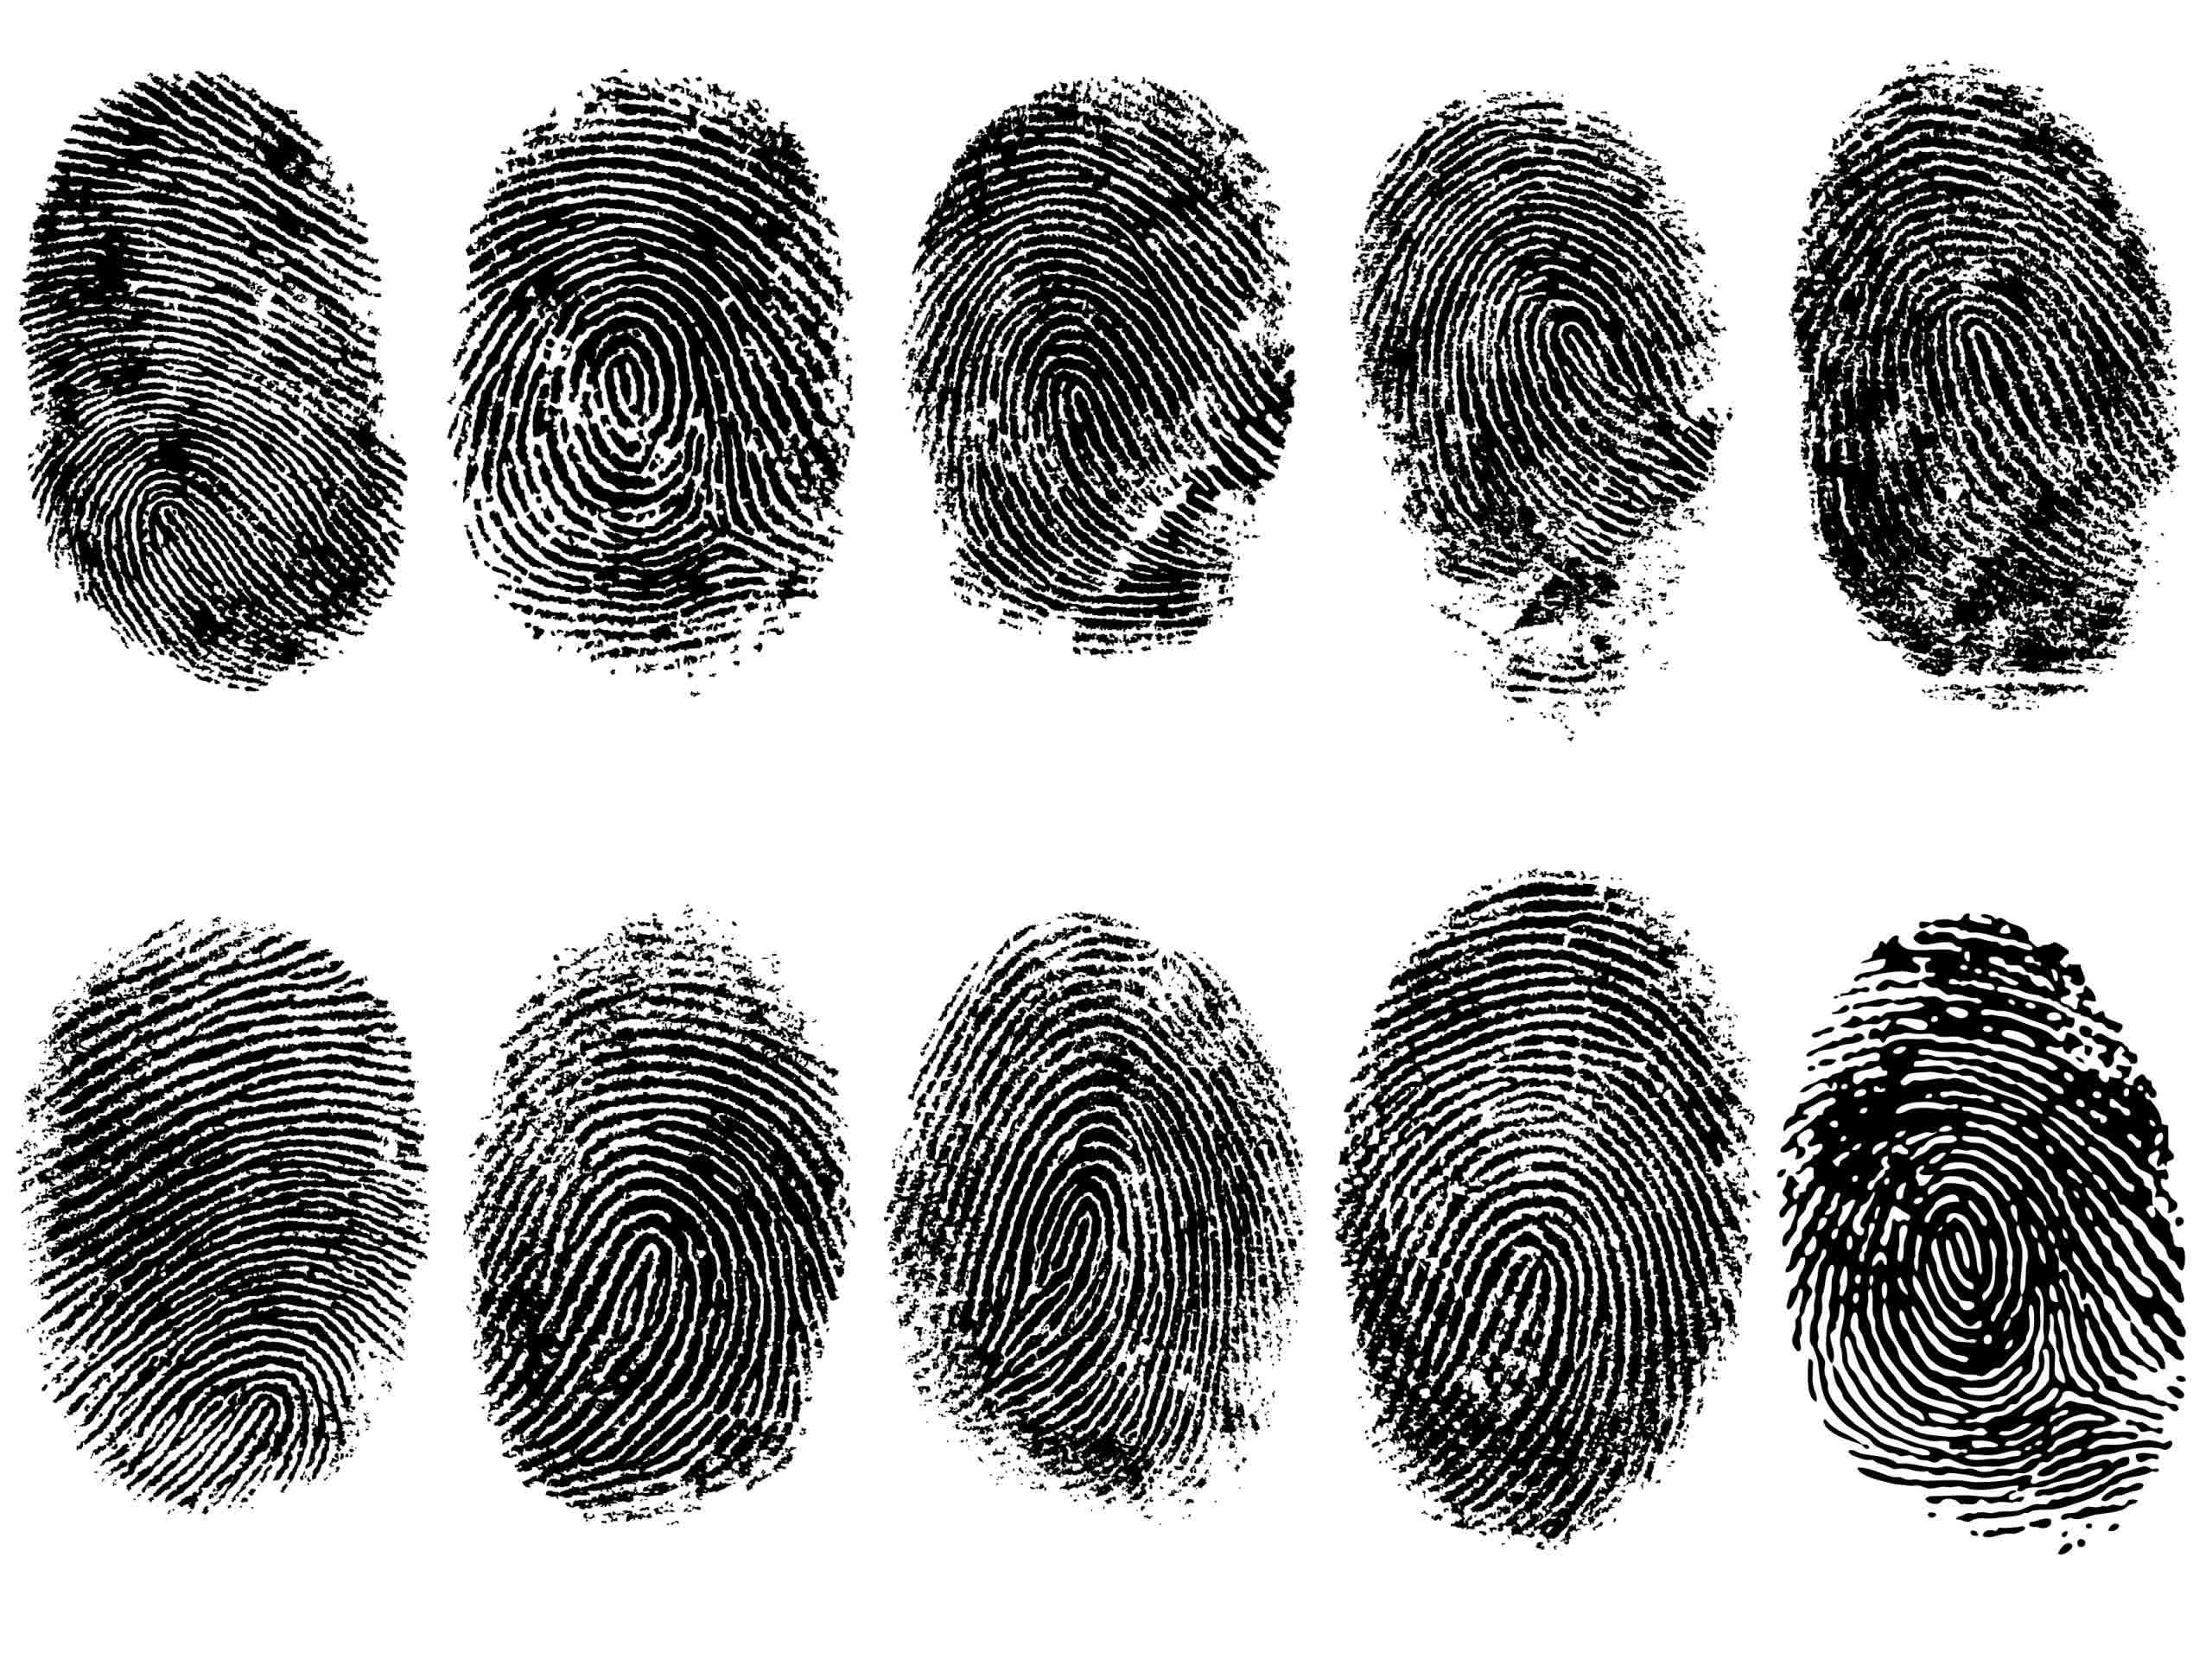 Fingerprints are not as unique as we think, study claims